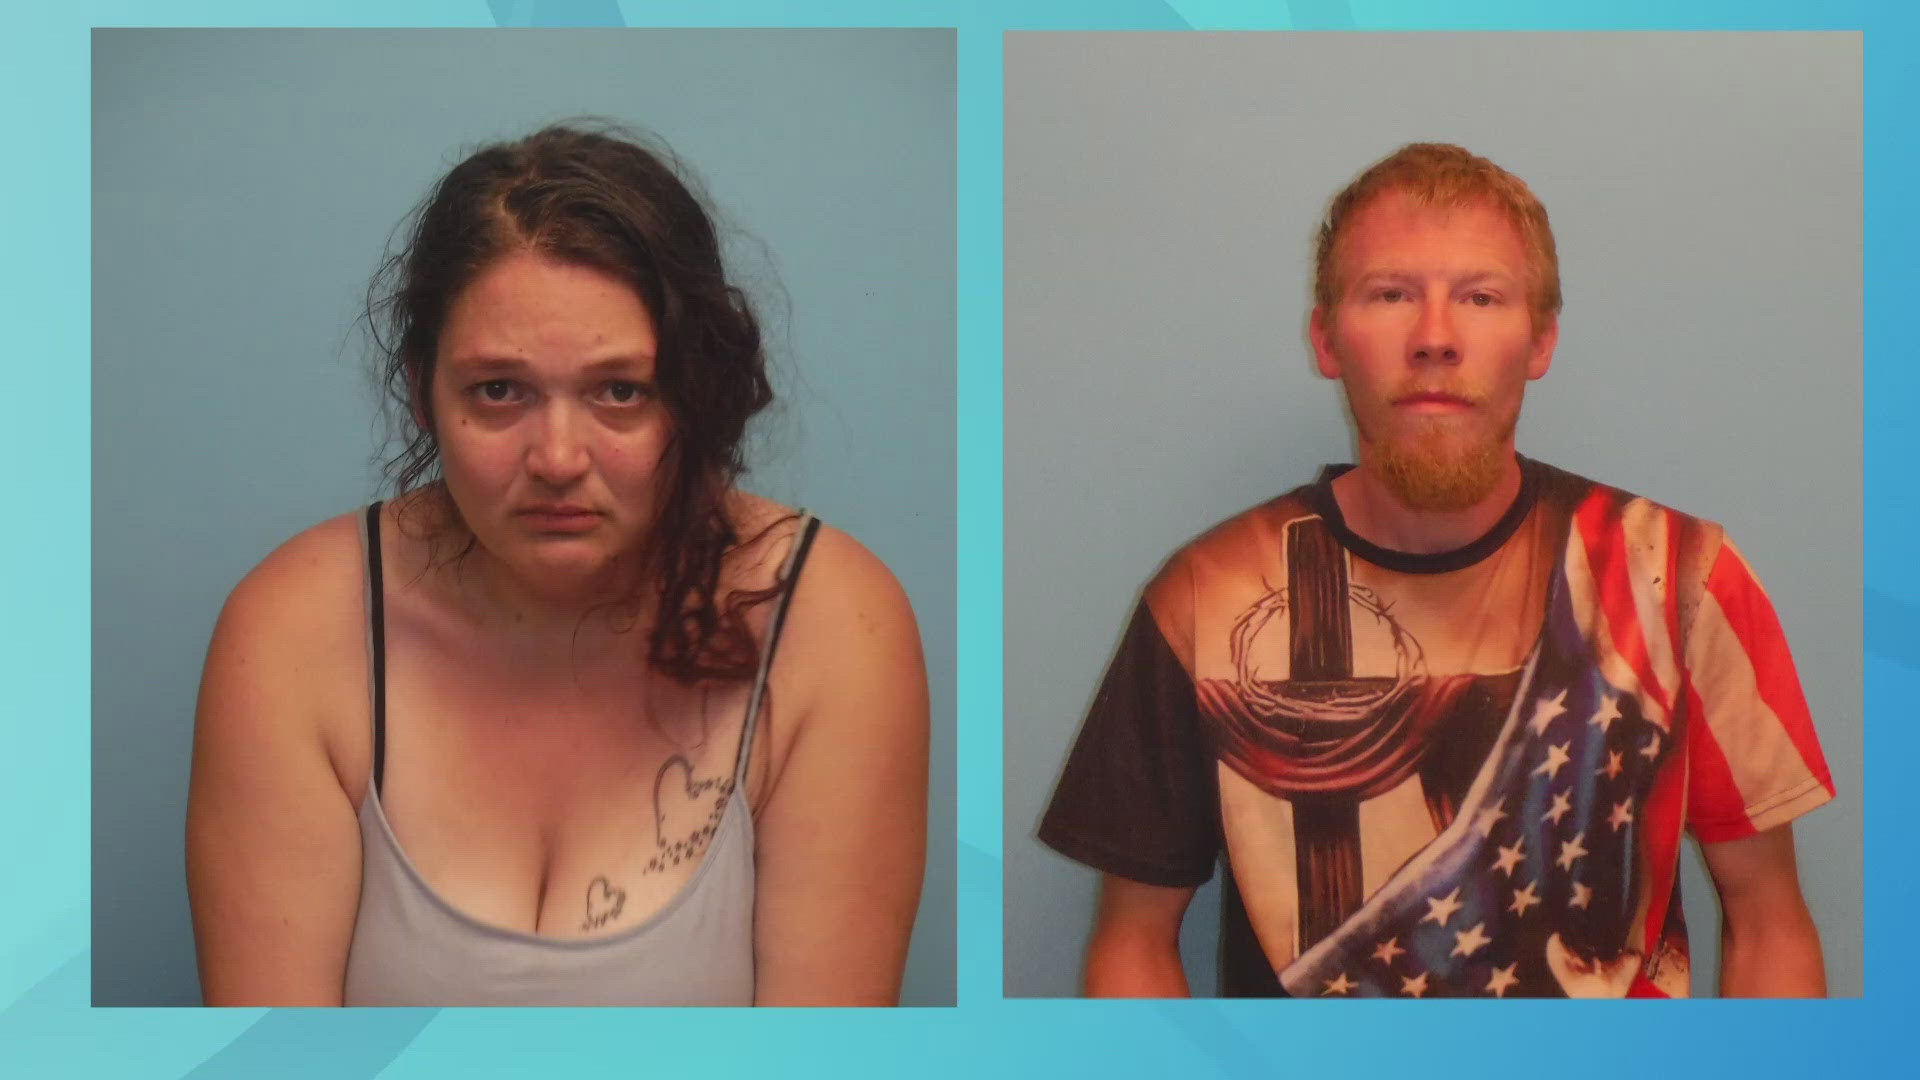 Police believe the pair were involved 'in a string of commercial and retail business thefts throughout Lake and Cuyahoga counties.'